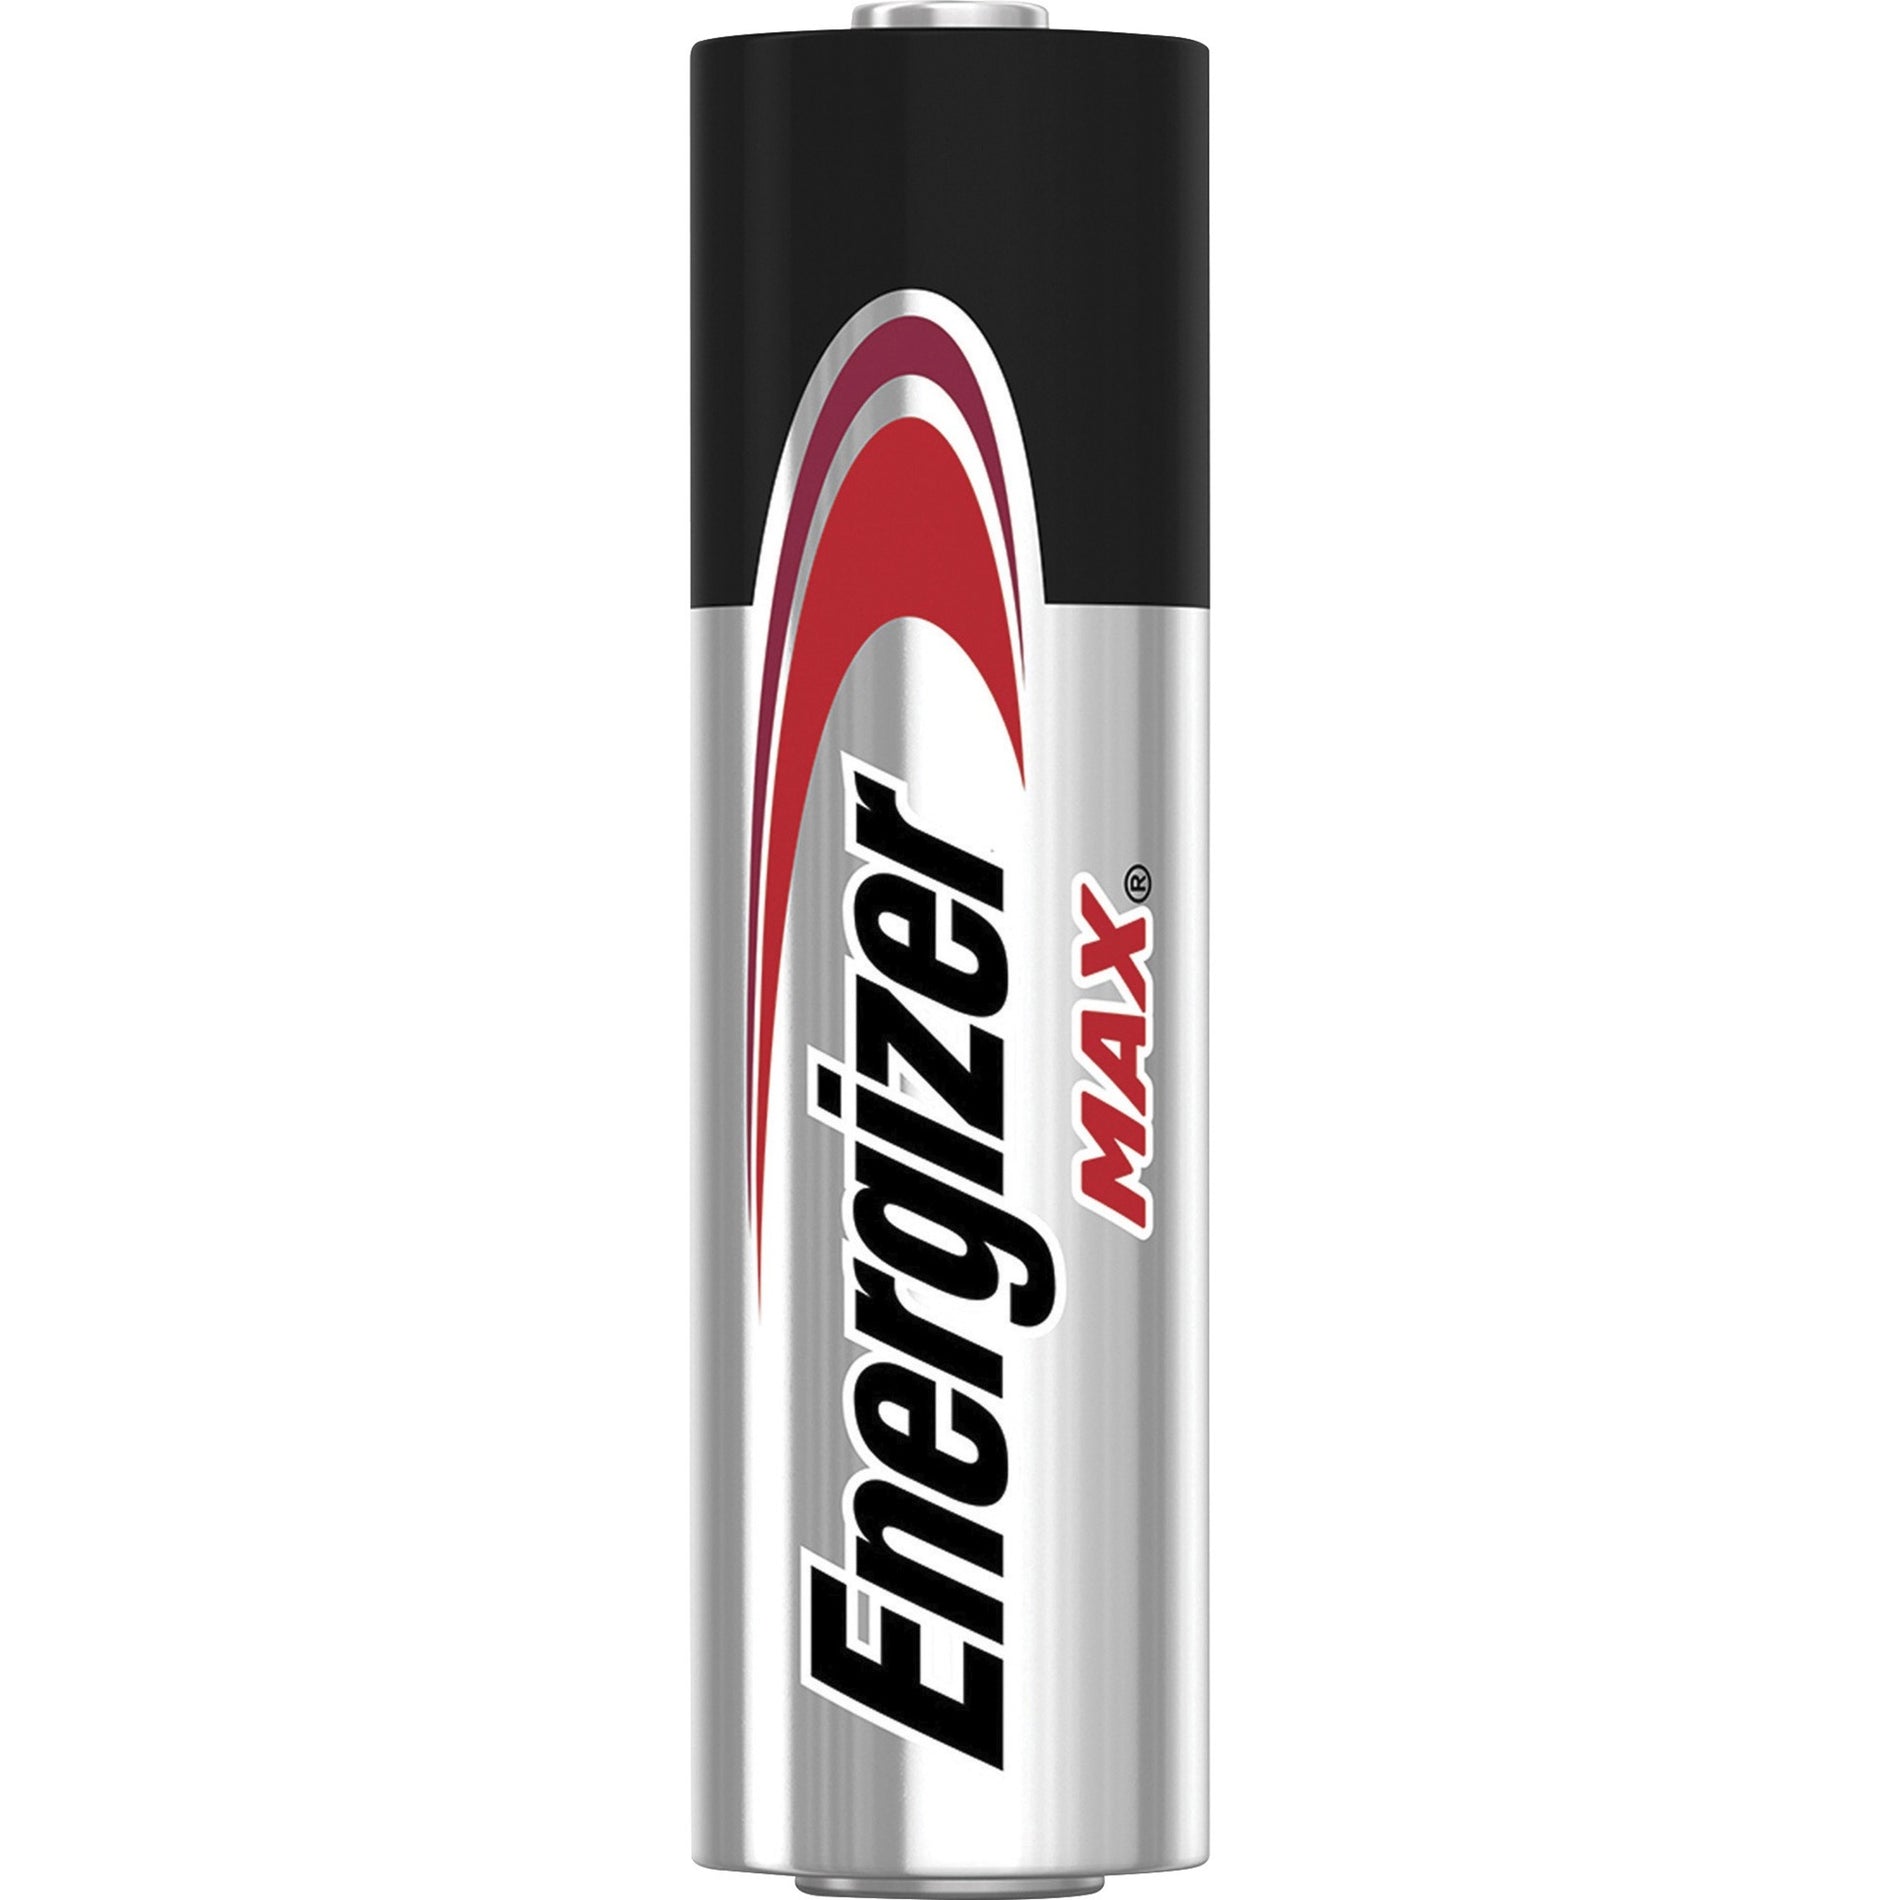 Energizer E91LP-16 Max Alkaline AA Batteries, Long-lasting Power for Toys, CD Players, Flashlights